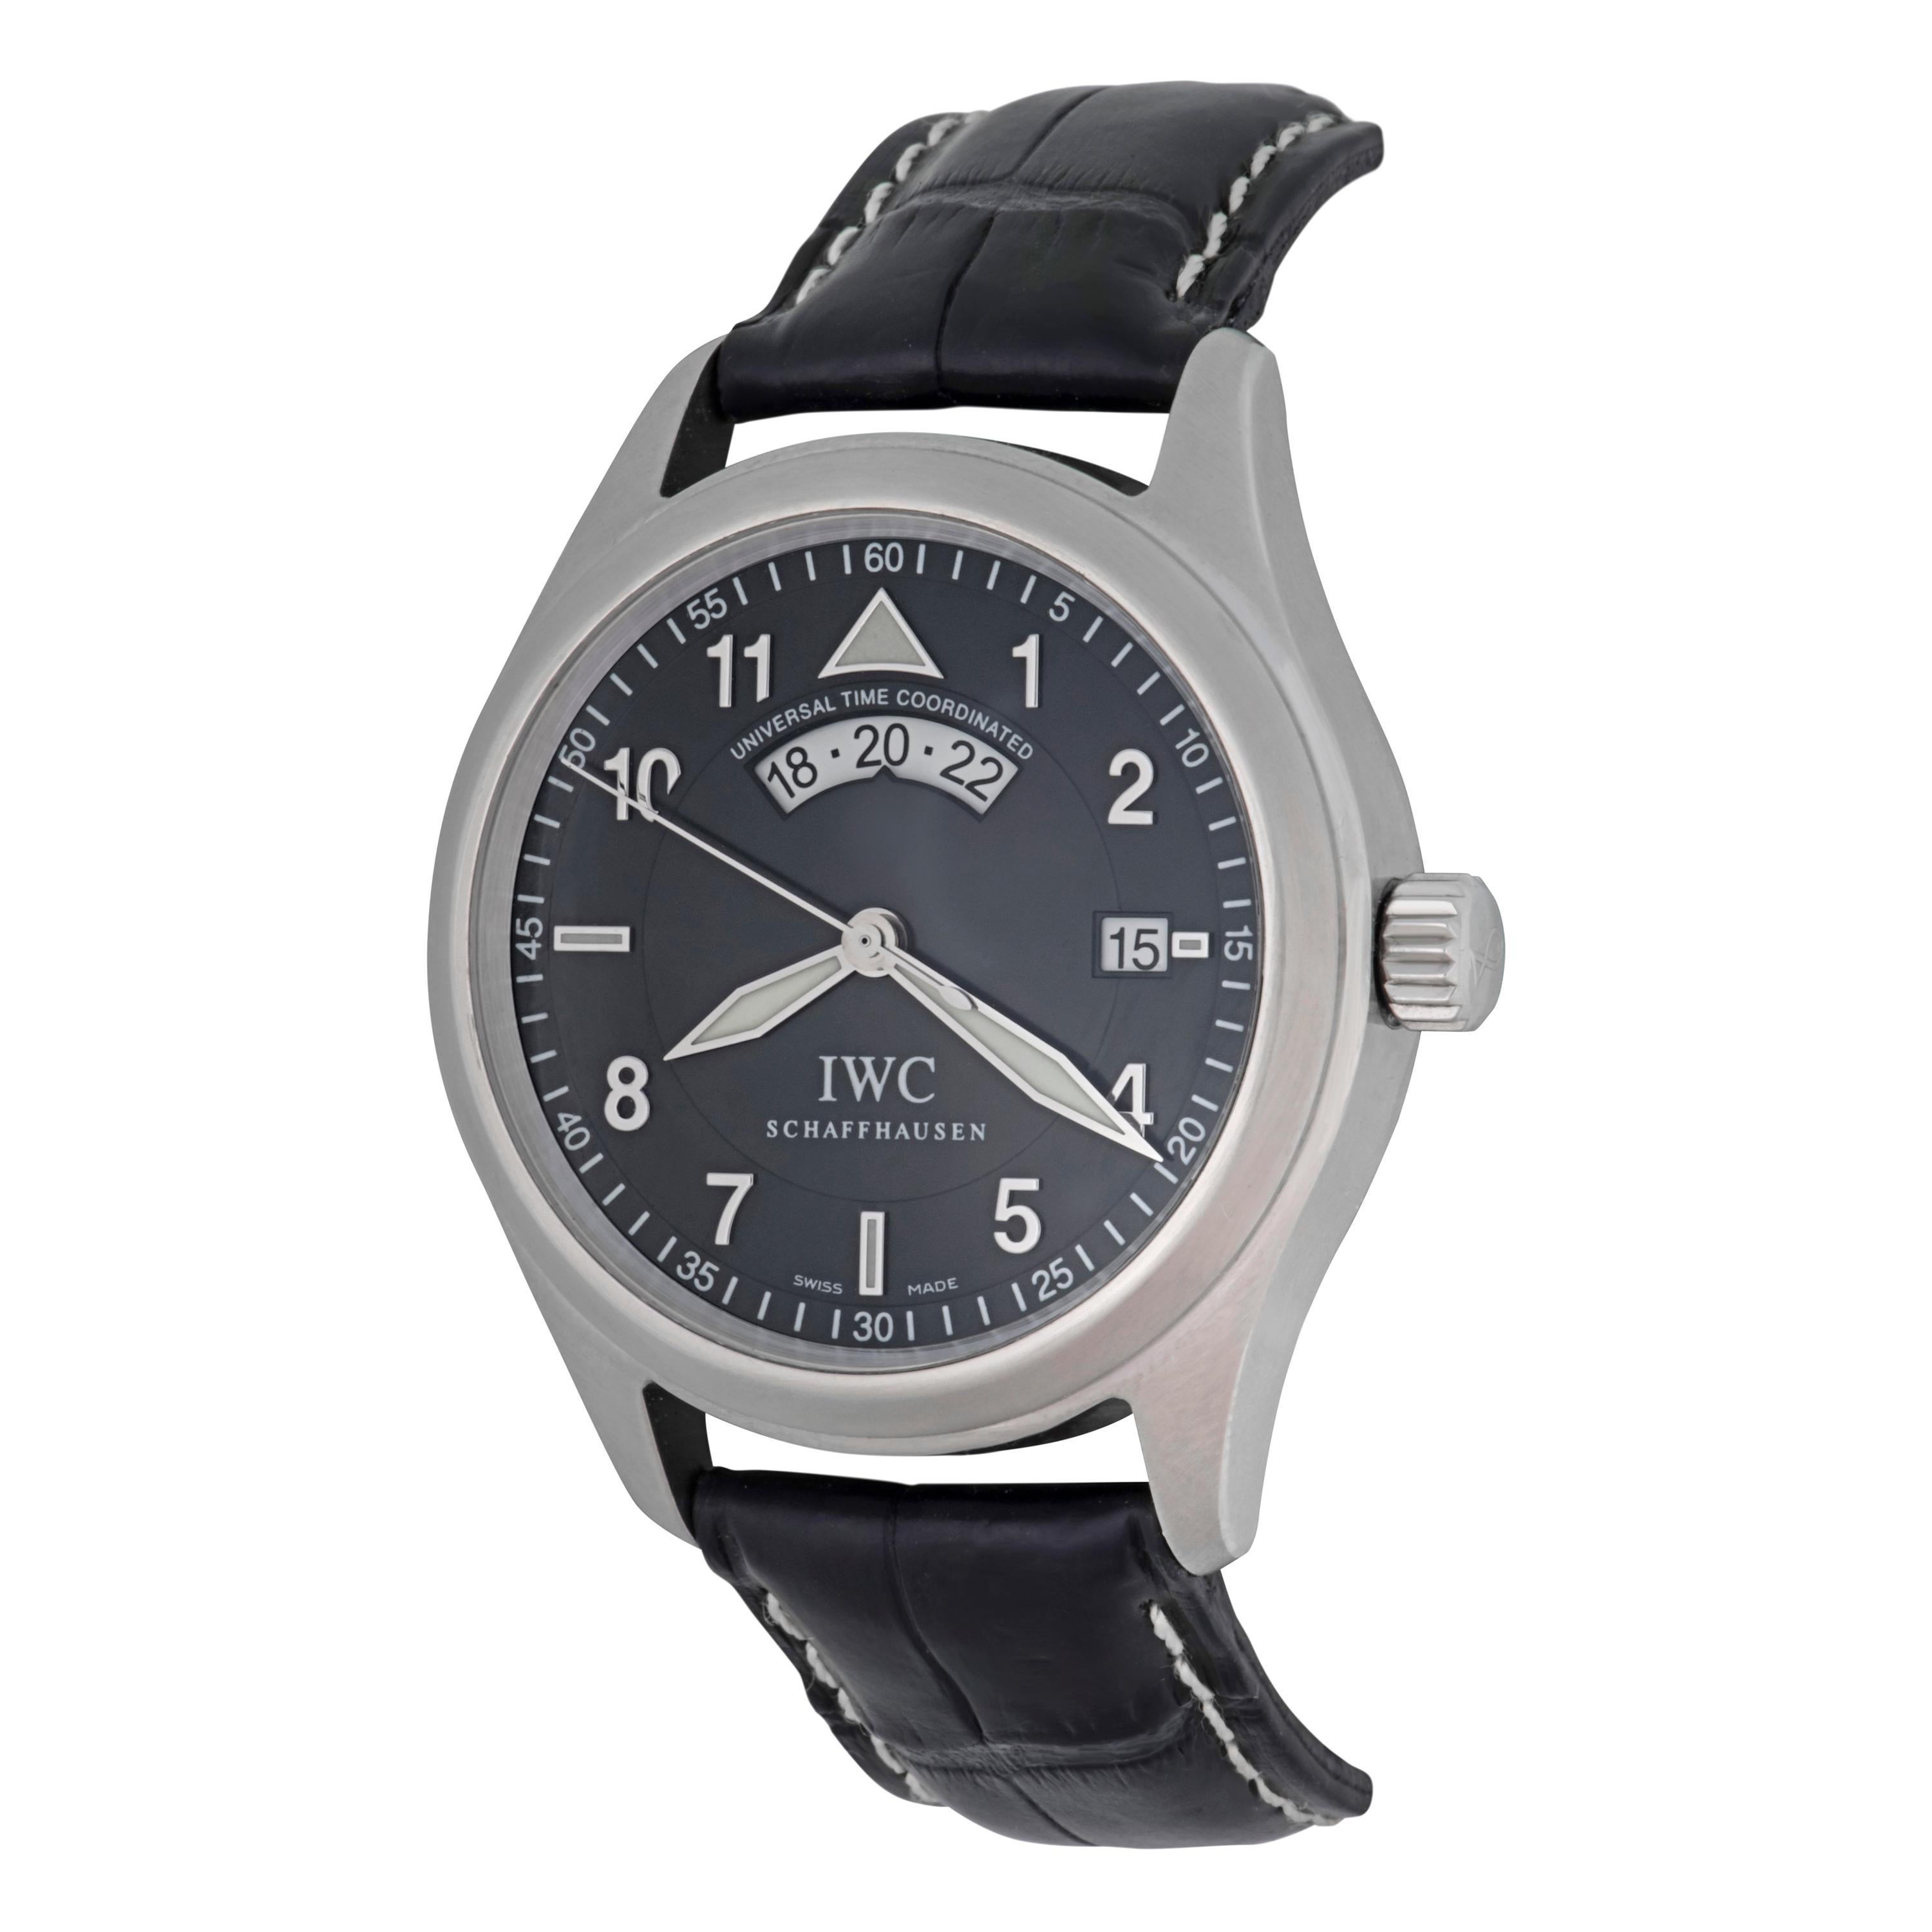 IWC UTC Universal Time Coordinated with 24 Hour Display Men's Wristwatch